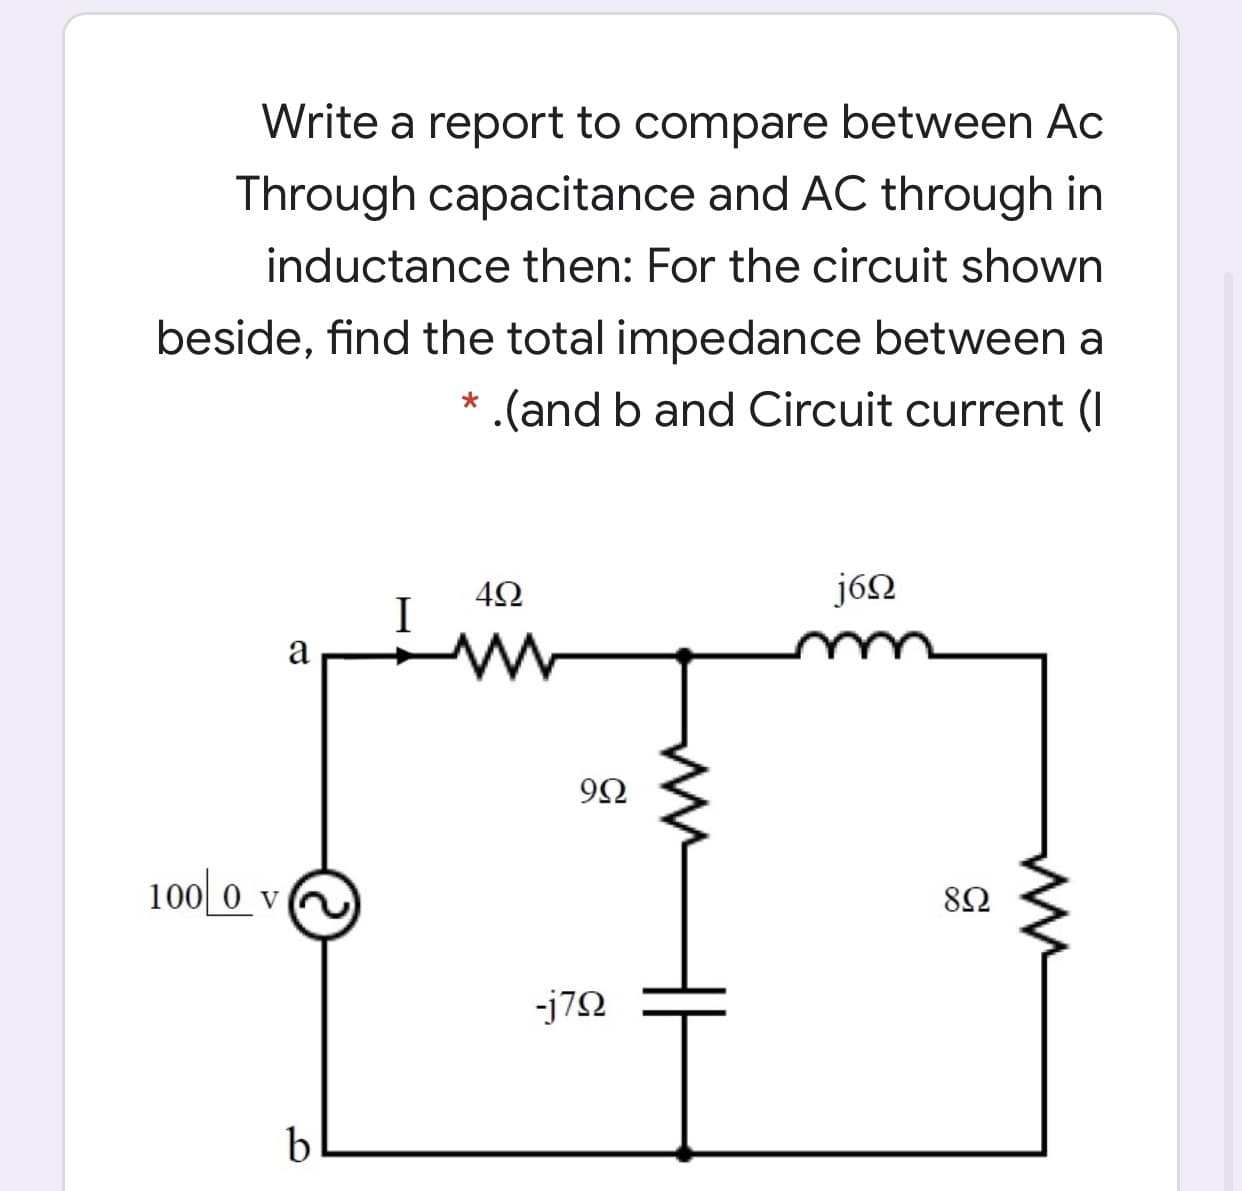 Write a report to compare between Ac
Through capacitance and AC through in
inductance then: For the circuit shown
beside, find the total impedance between a
(and b and Circuit current (I
j6N
a
100 0 v
82
-j72
b
